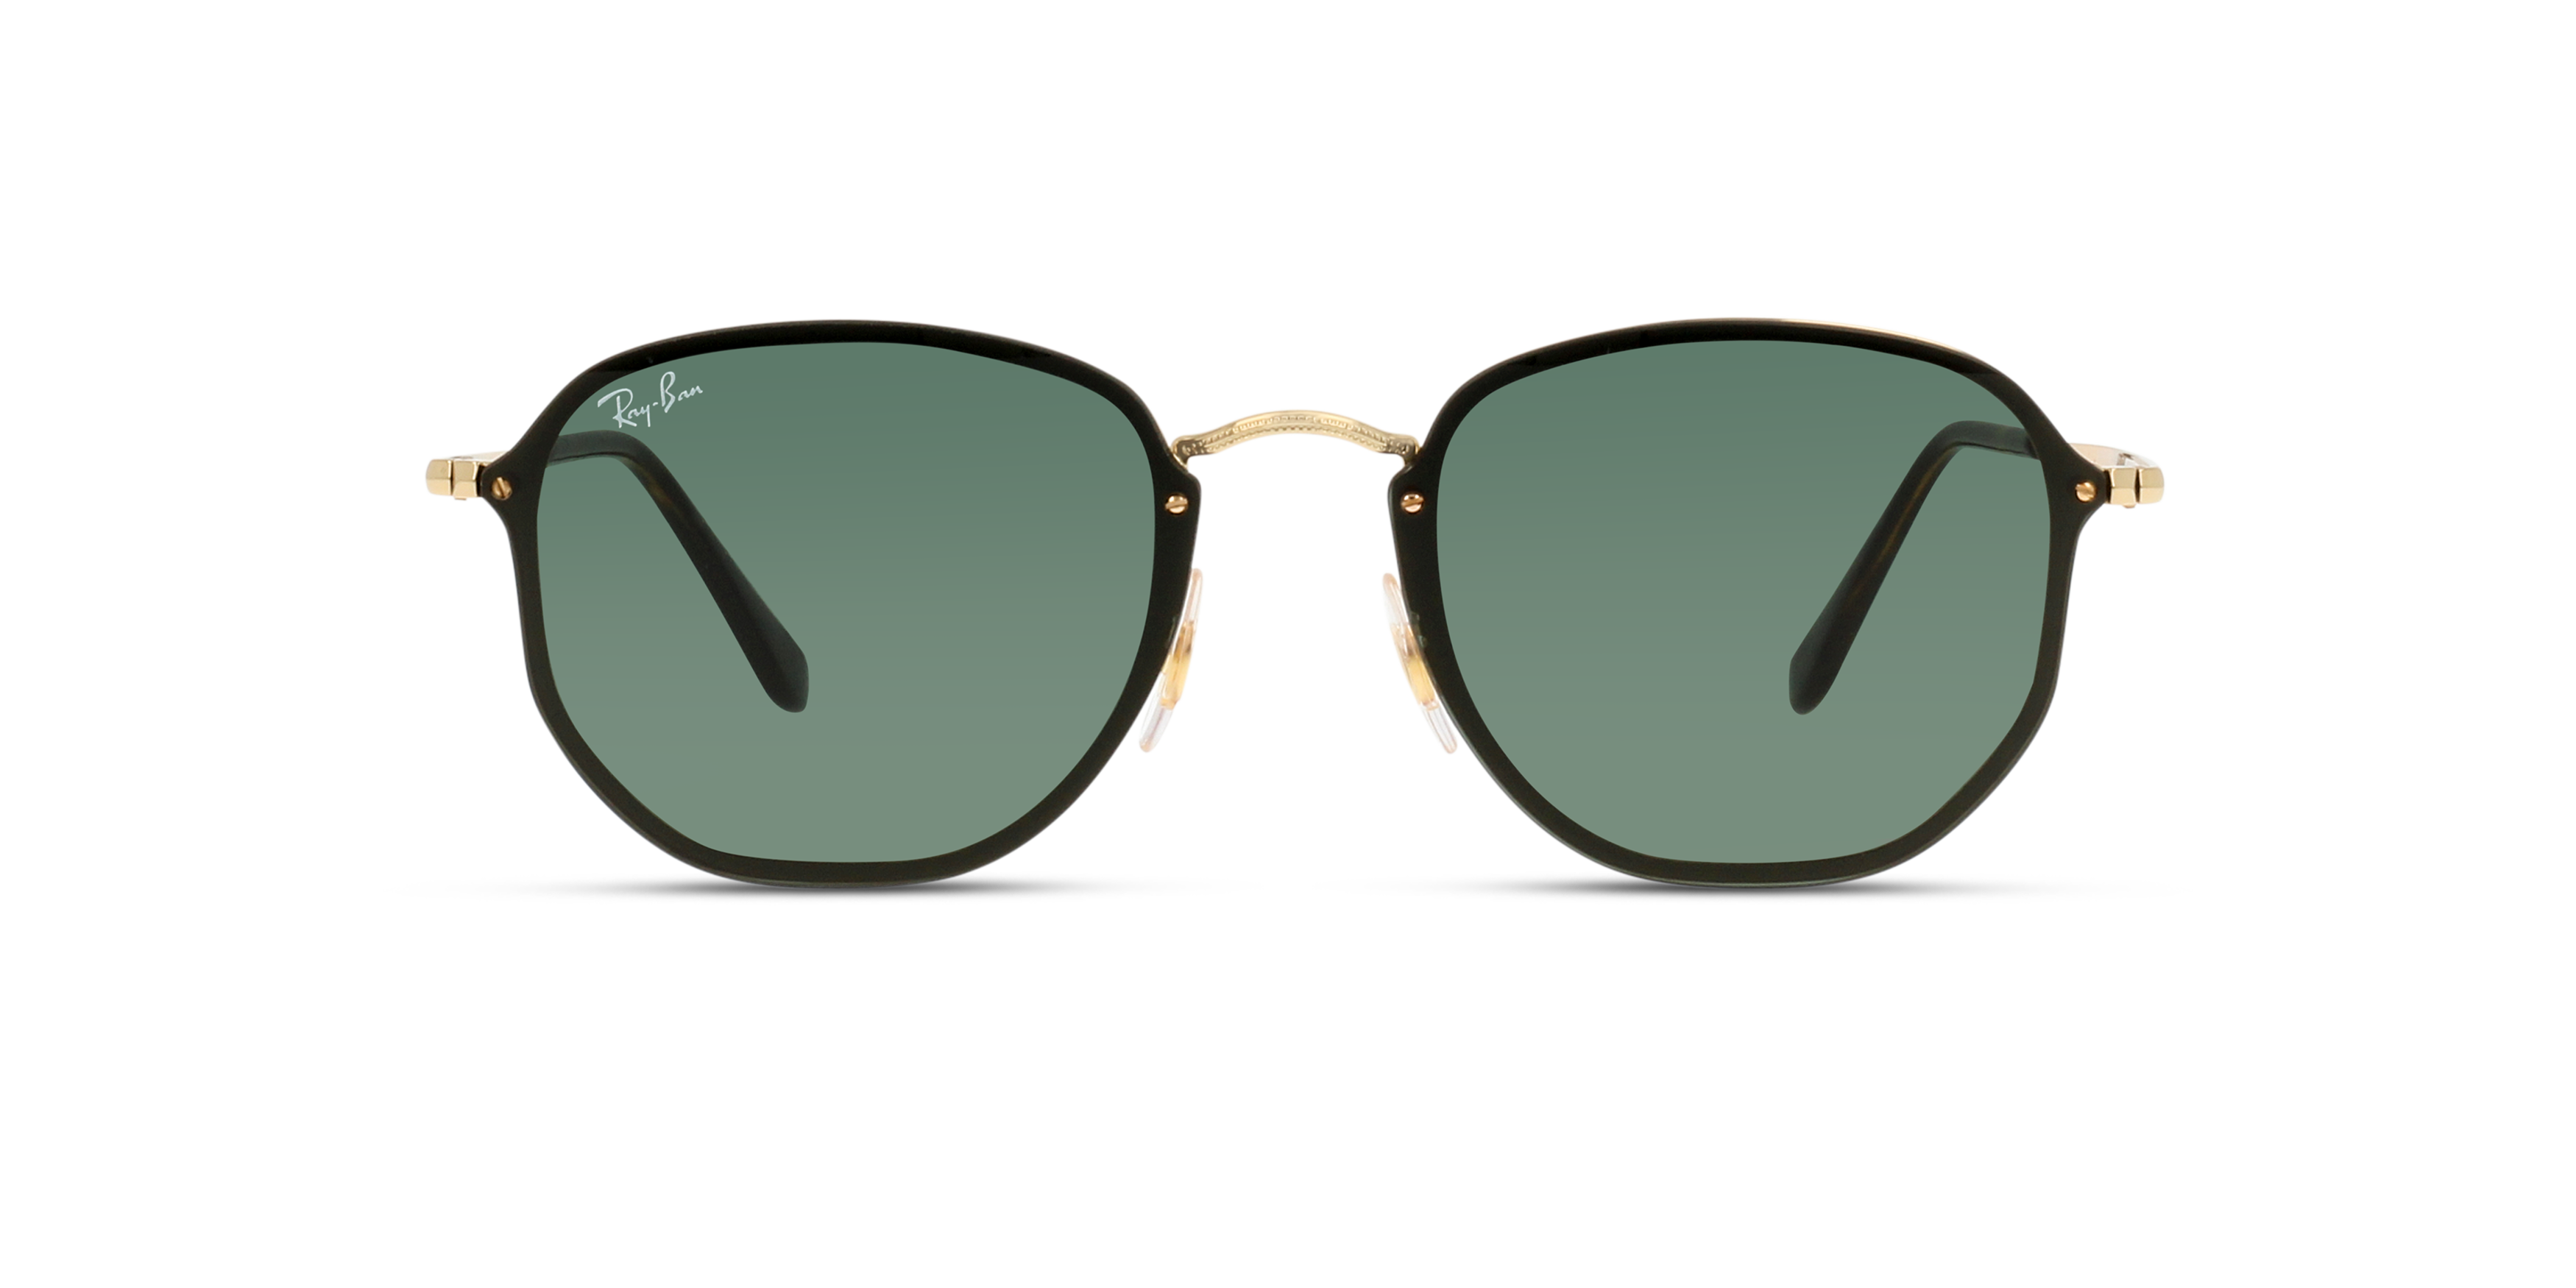 [products.image.front] Ray-Ban Blaze Hexagonal RB3579N 001/71